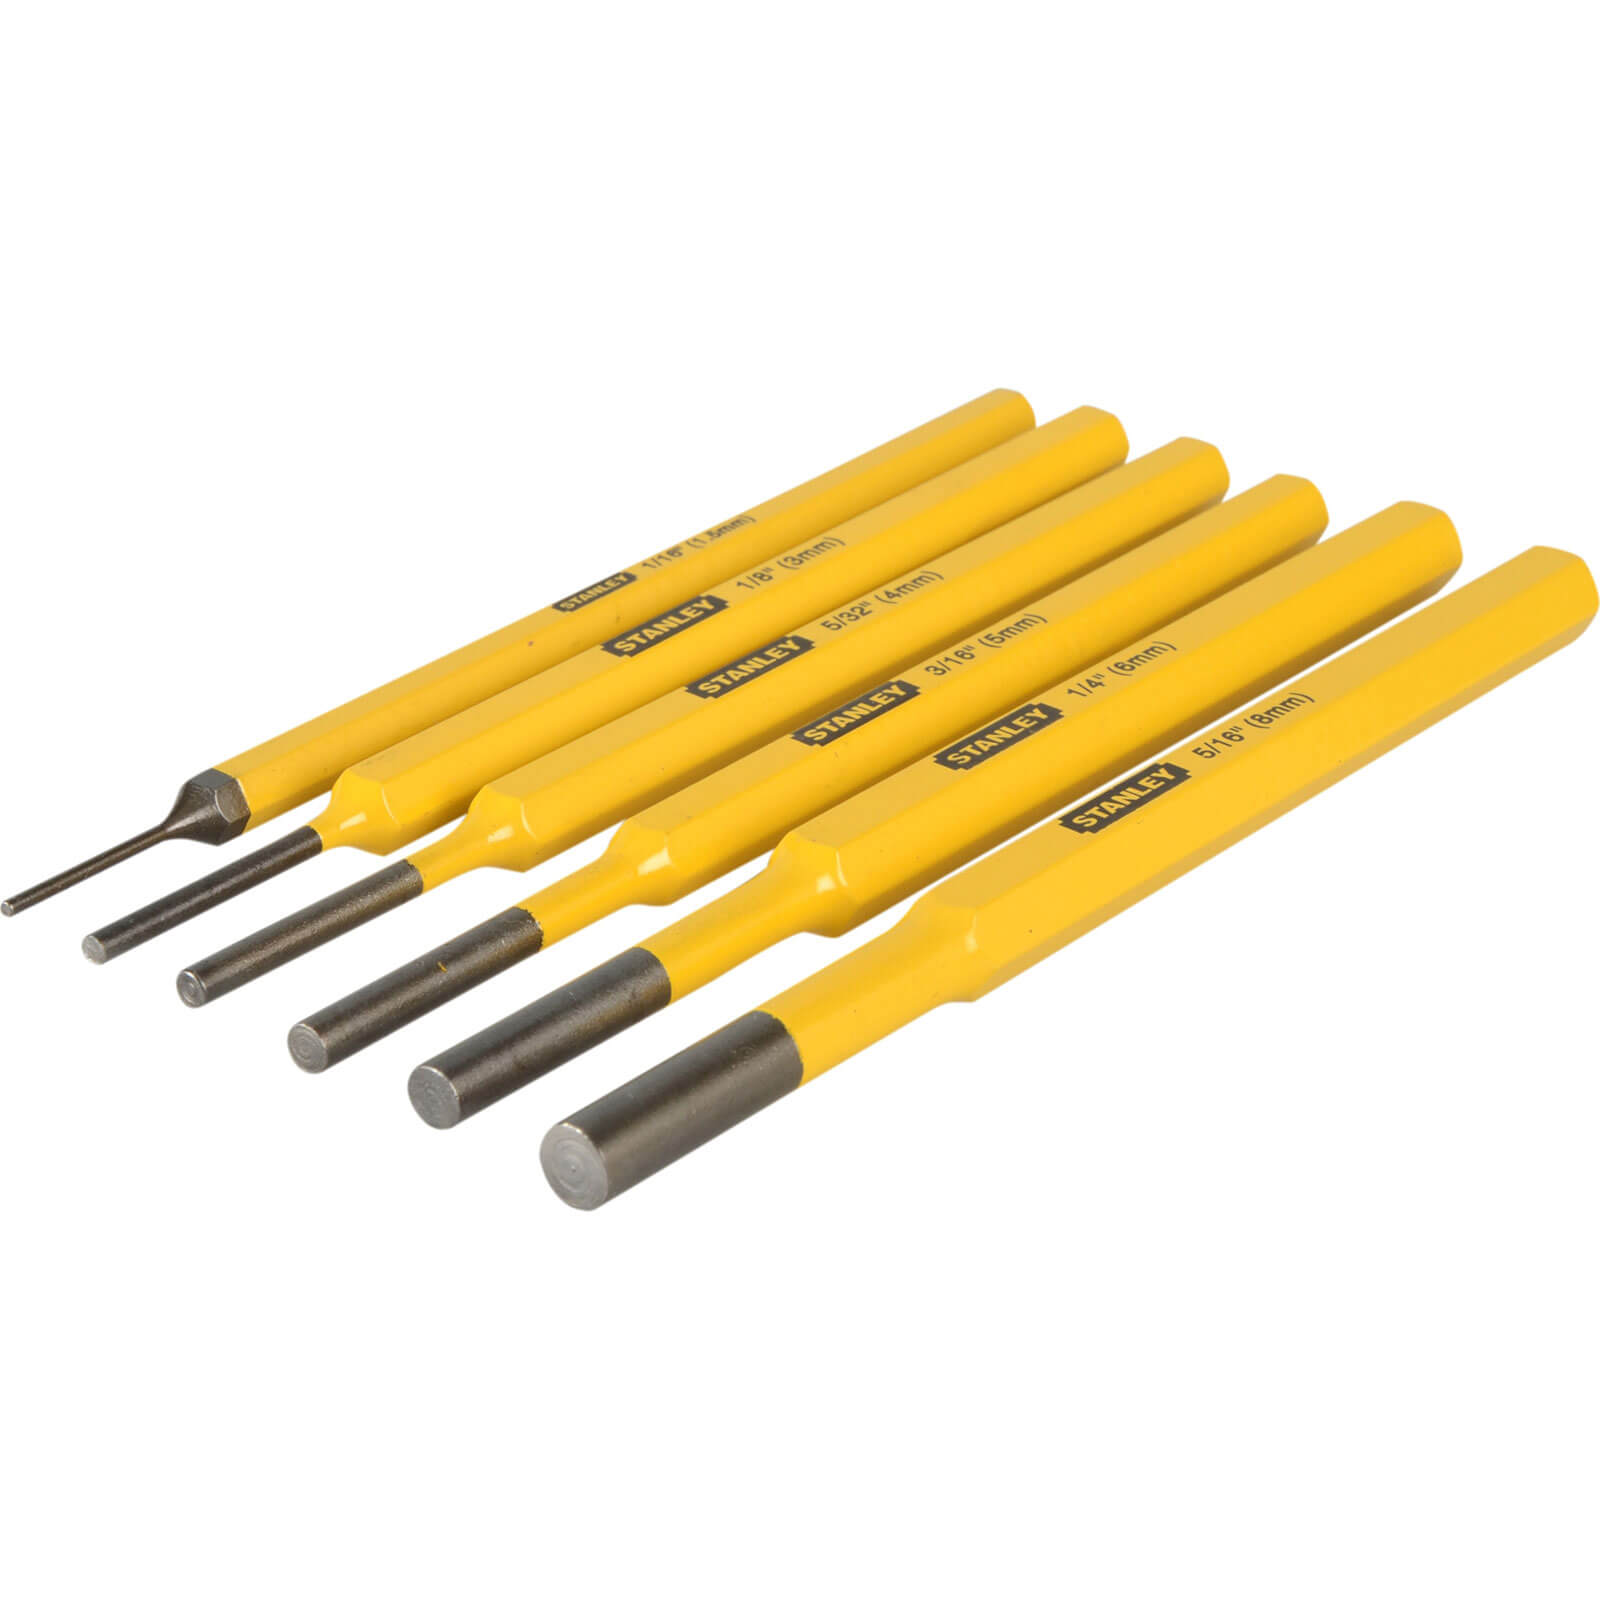 Image of Stanley 6 Piece Punch Set